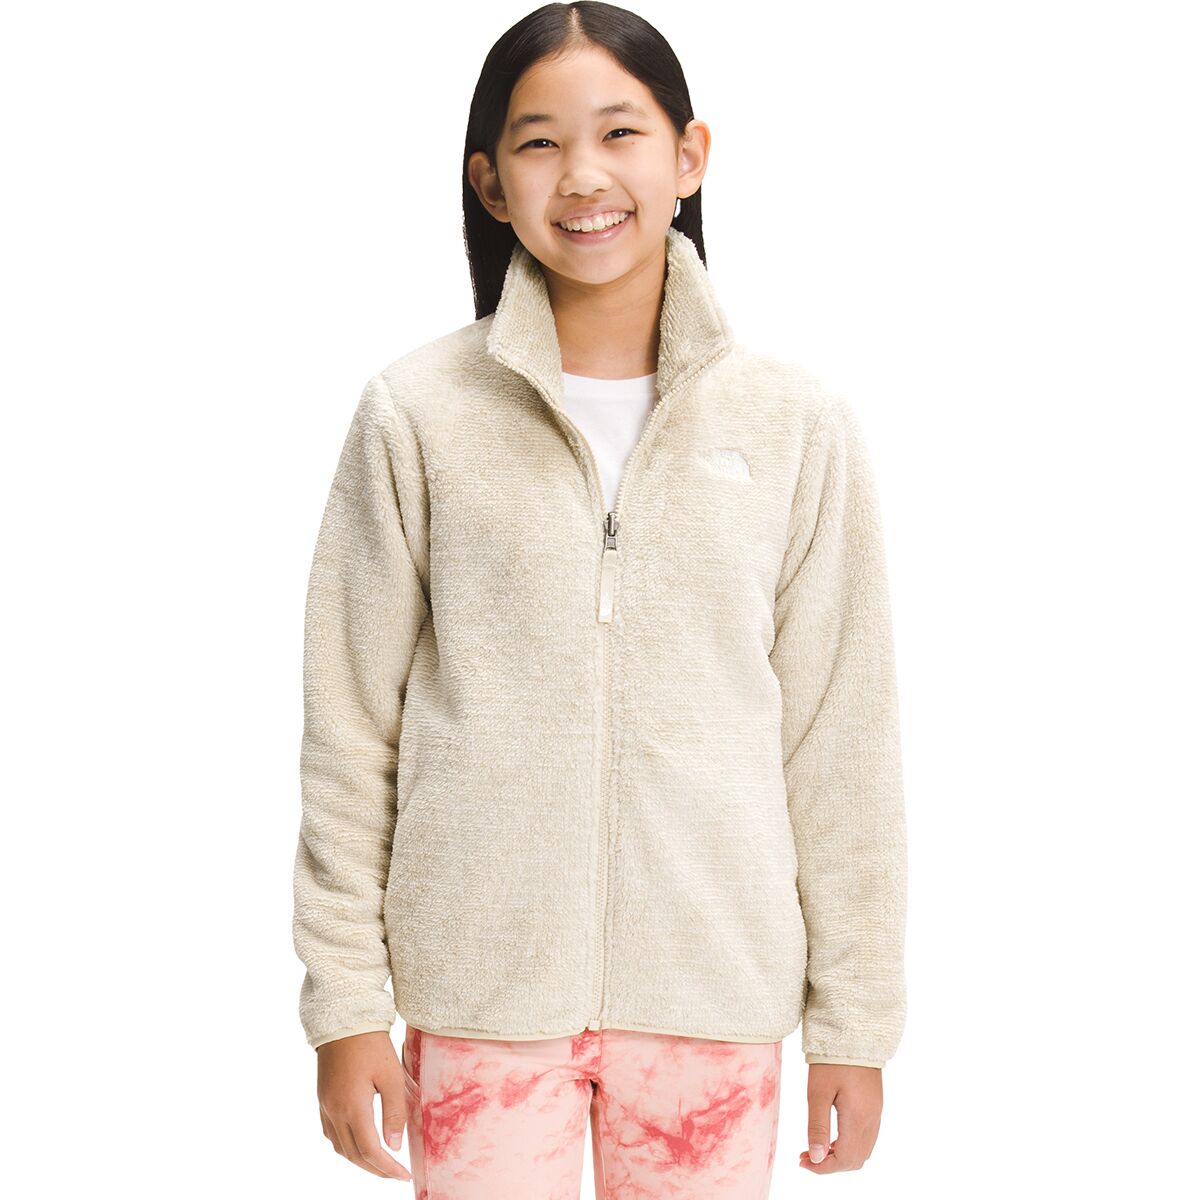 The North Face Suave Oso Fleece Jacket - Girls'